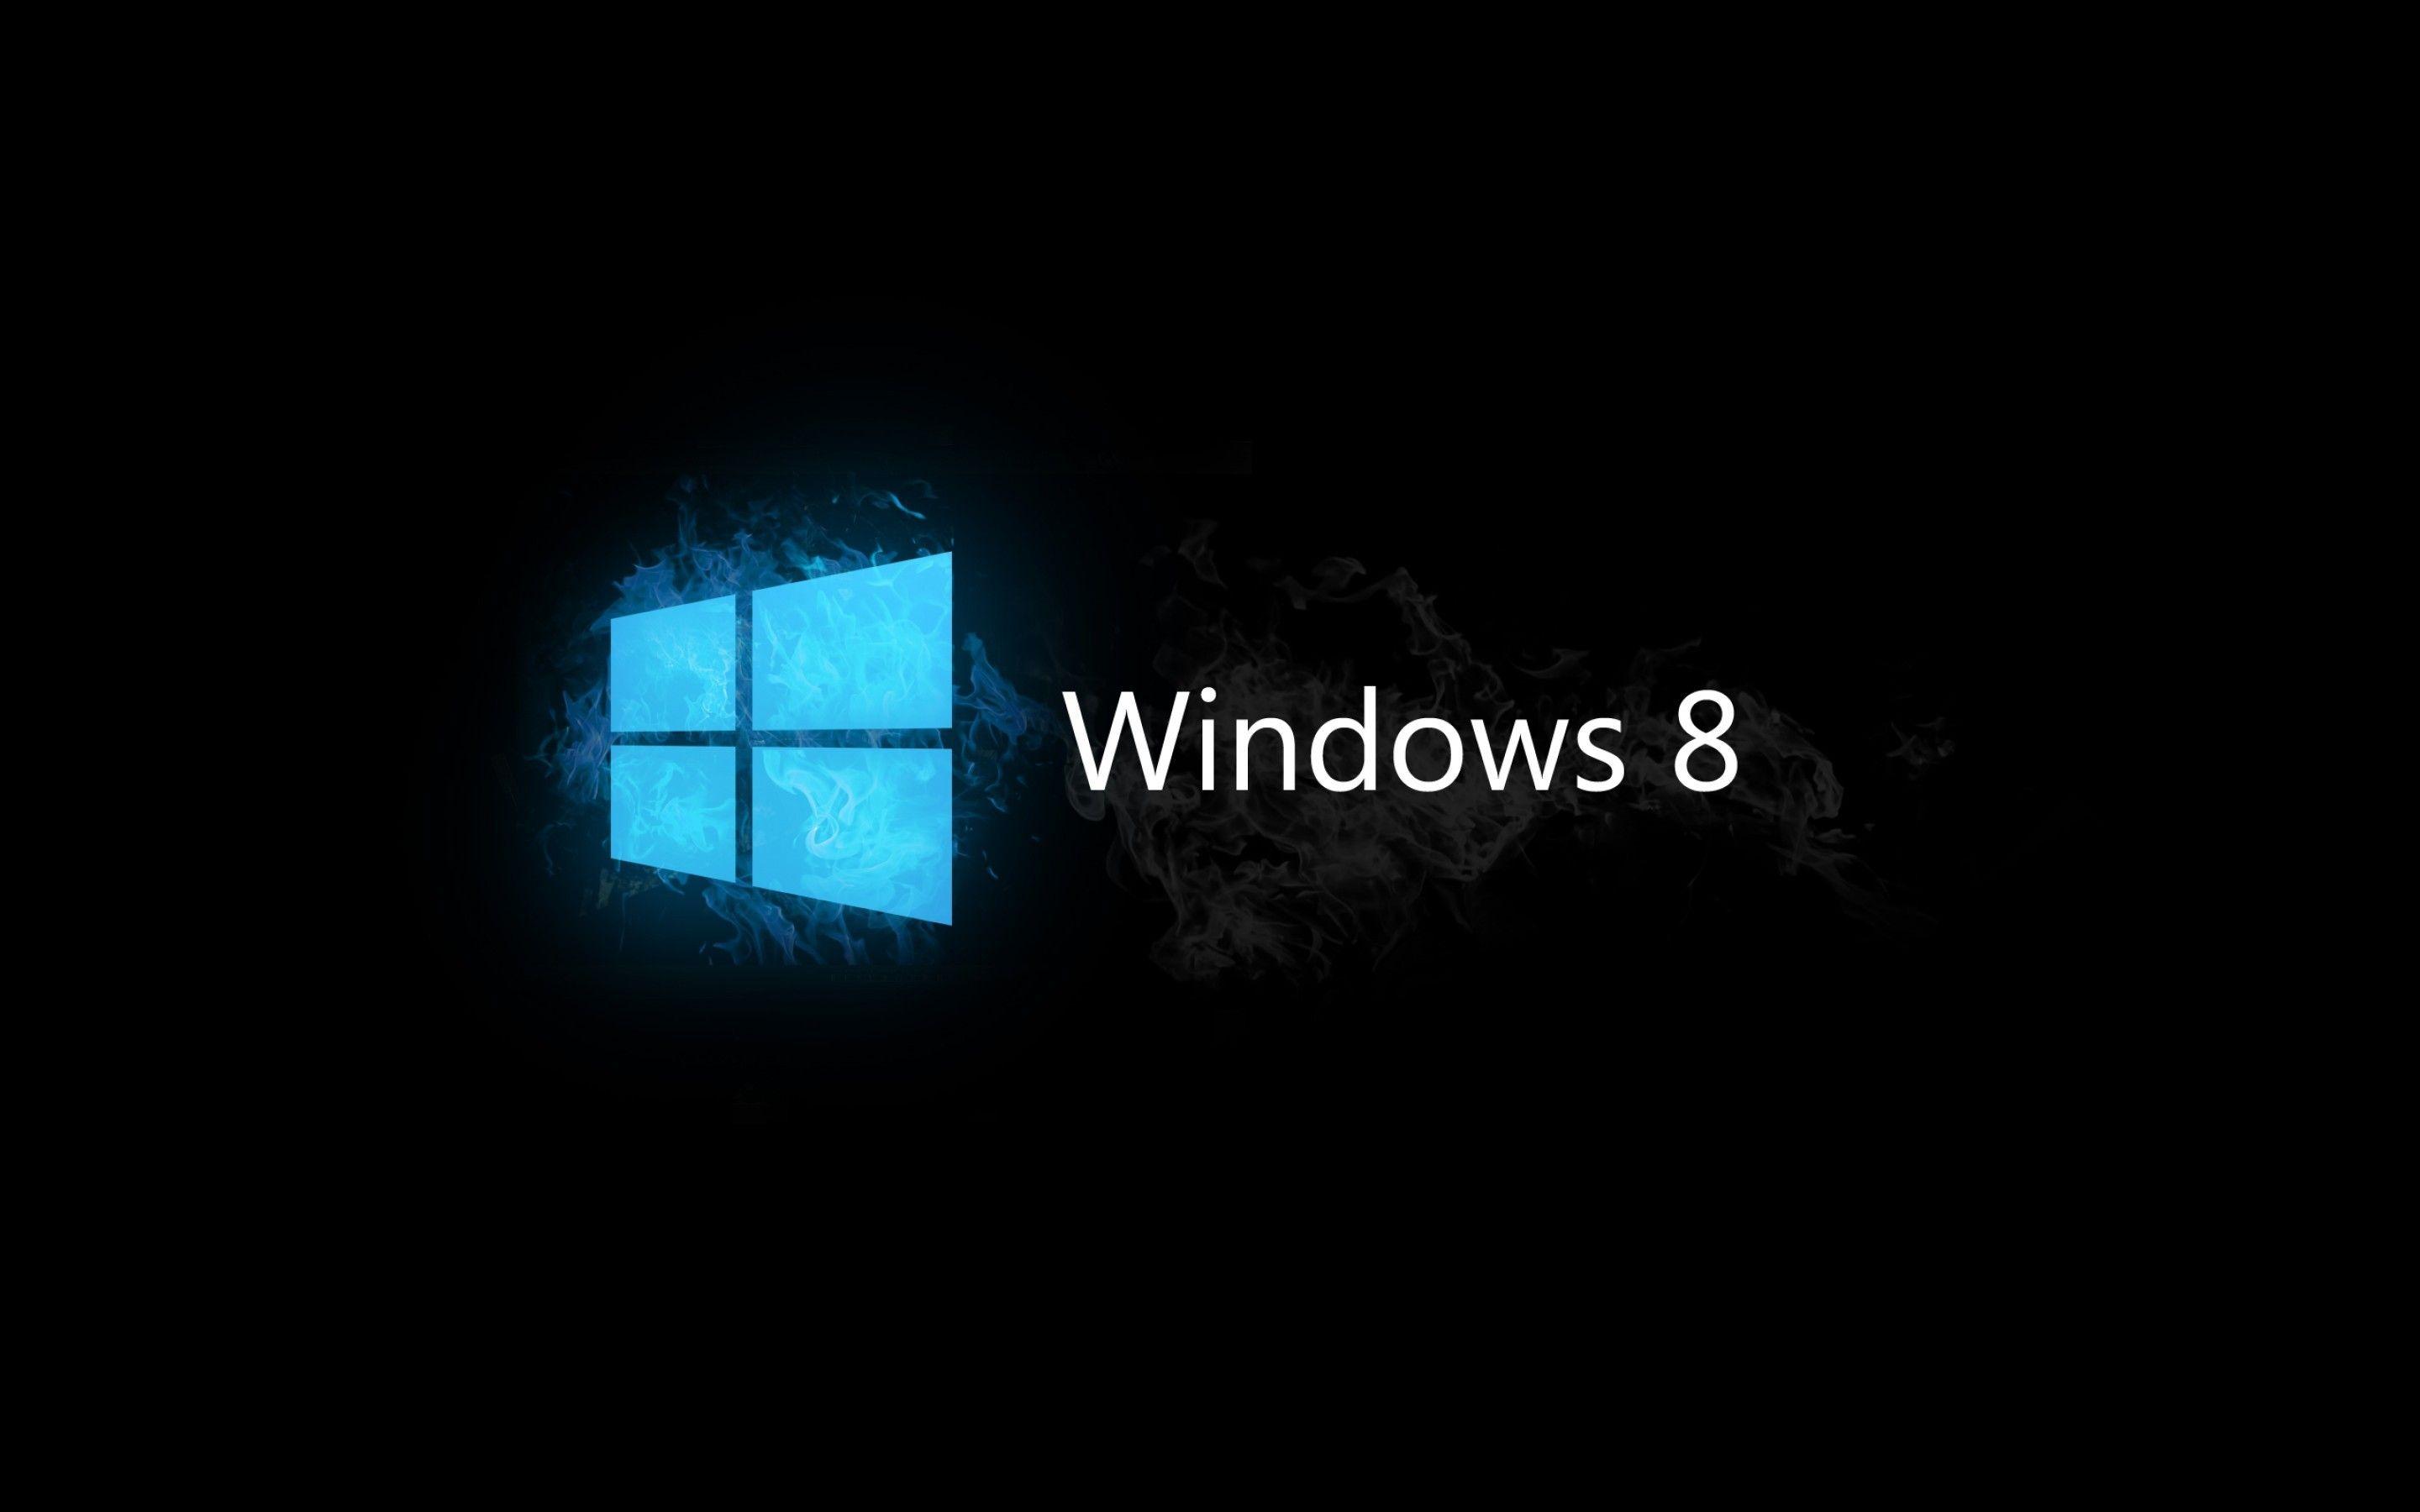 Download these 44 HD Windows 8 Wallpaper Image